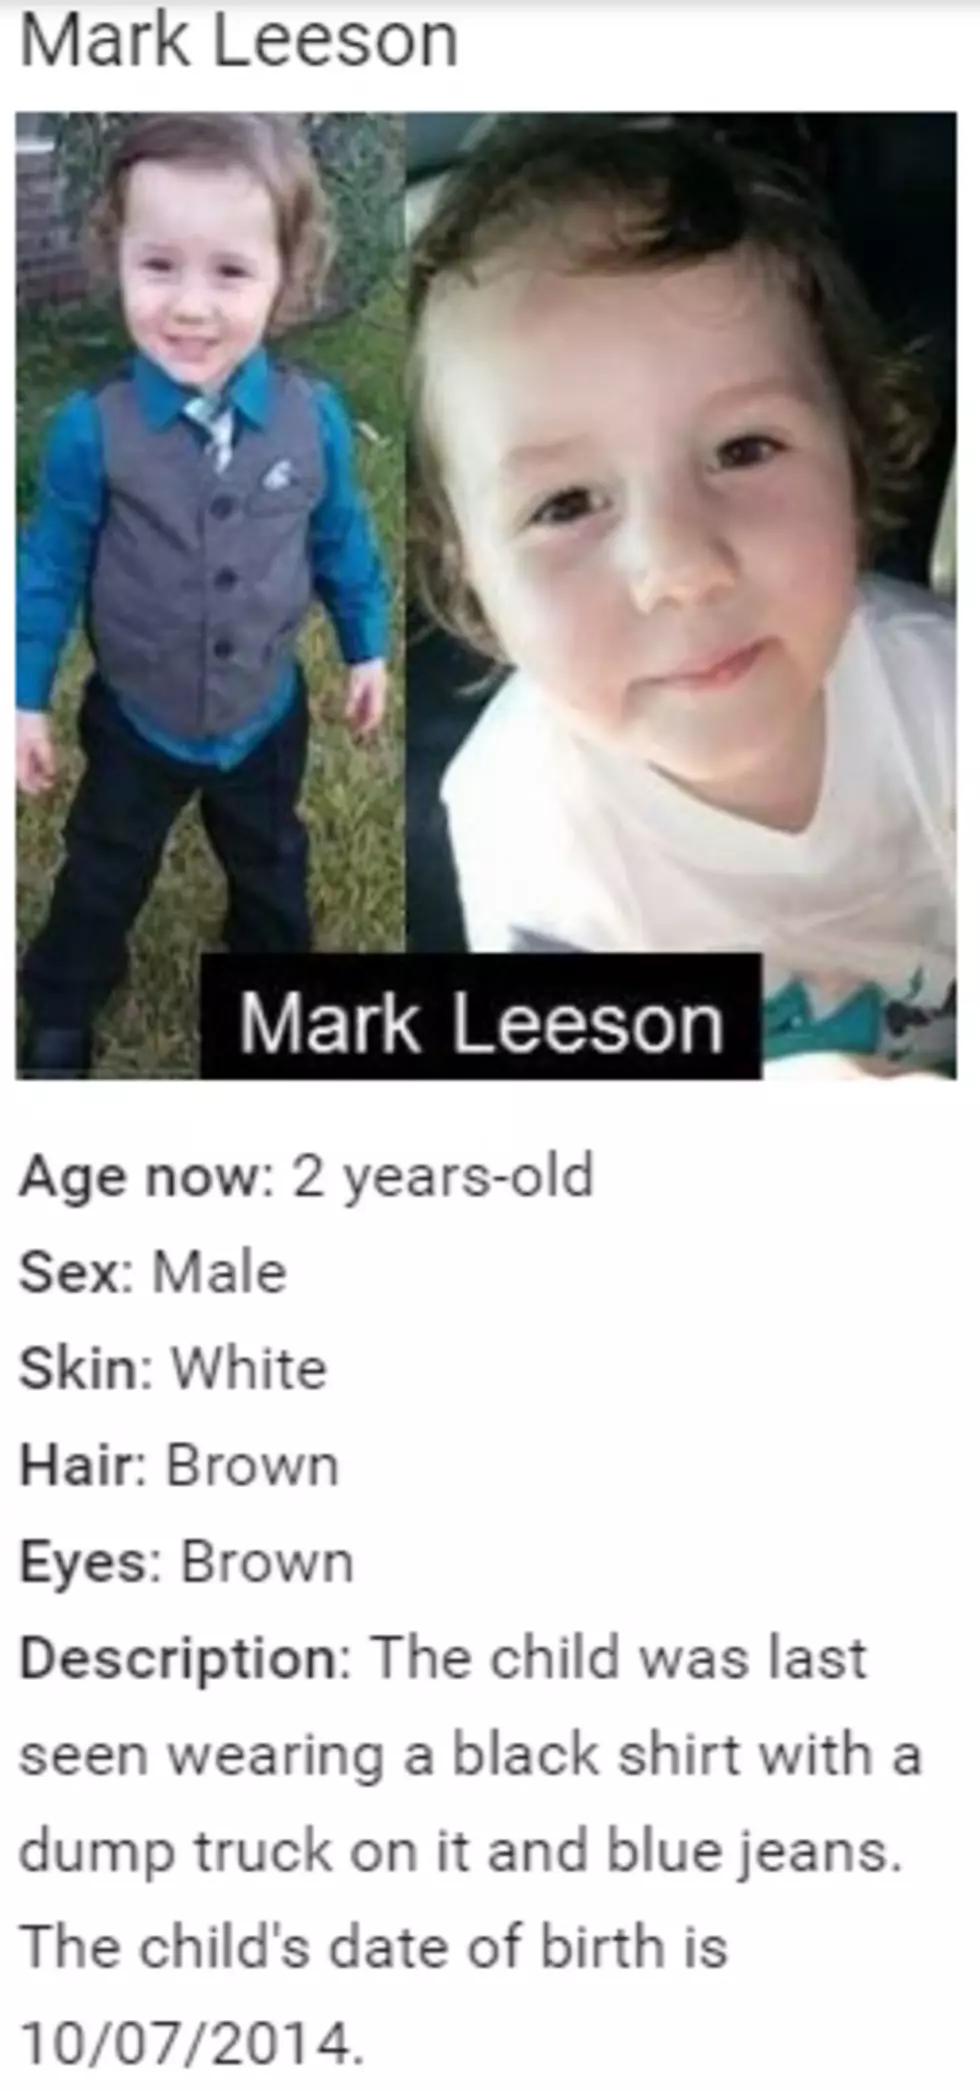 Amber Alert Issued for Mark Leeson of La Marque, Texas